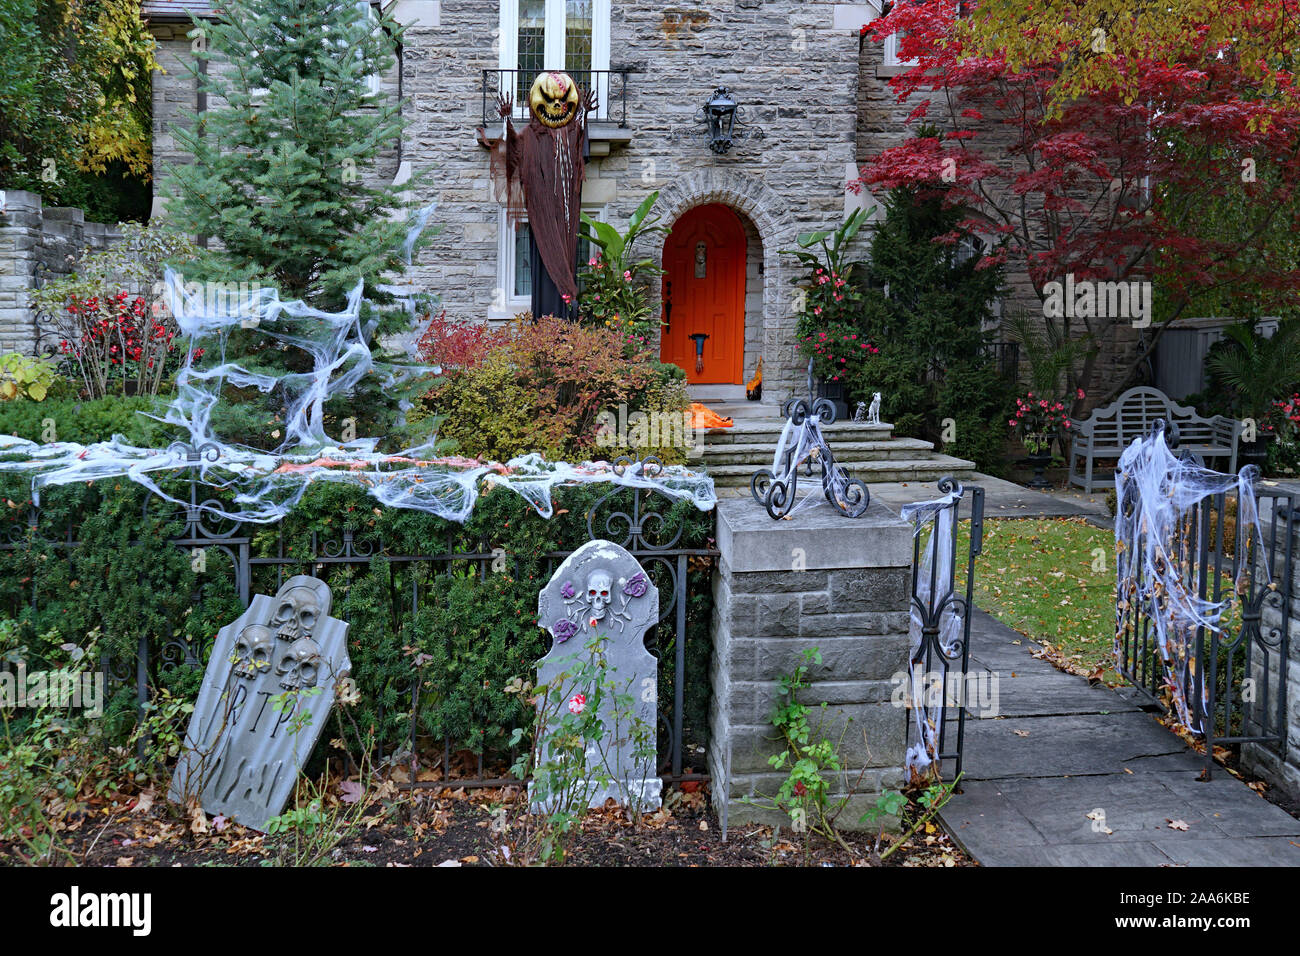 PITTSBURGH - NOVEMBER 2019:  Halloween is a popular holiday for which people put out quite imaginative and gory decorations in front of their homes. Stock Photo